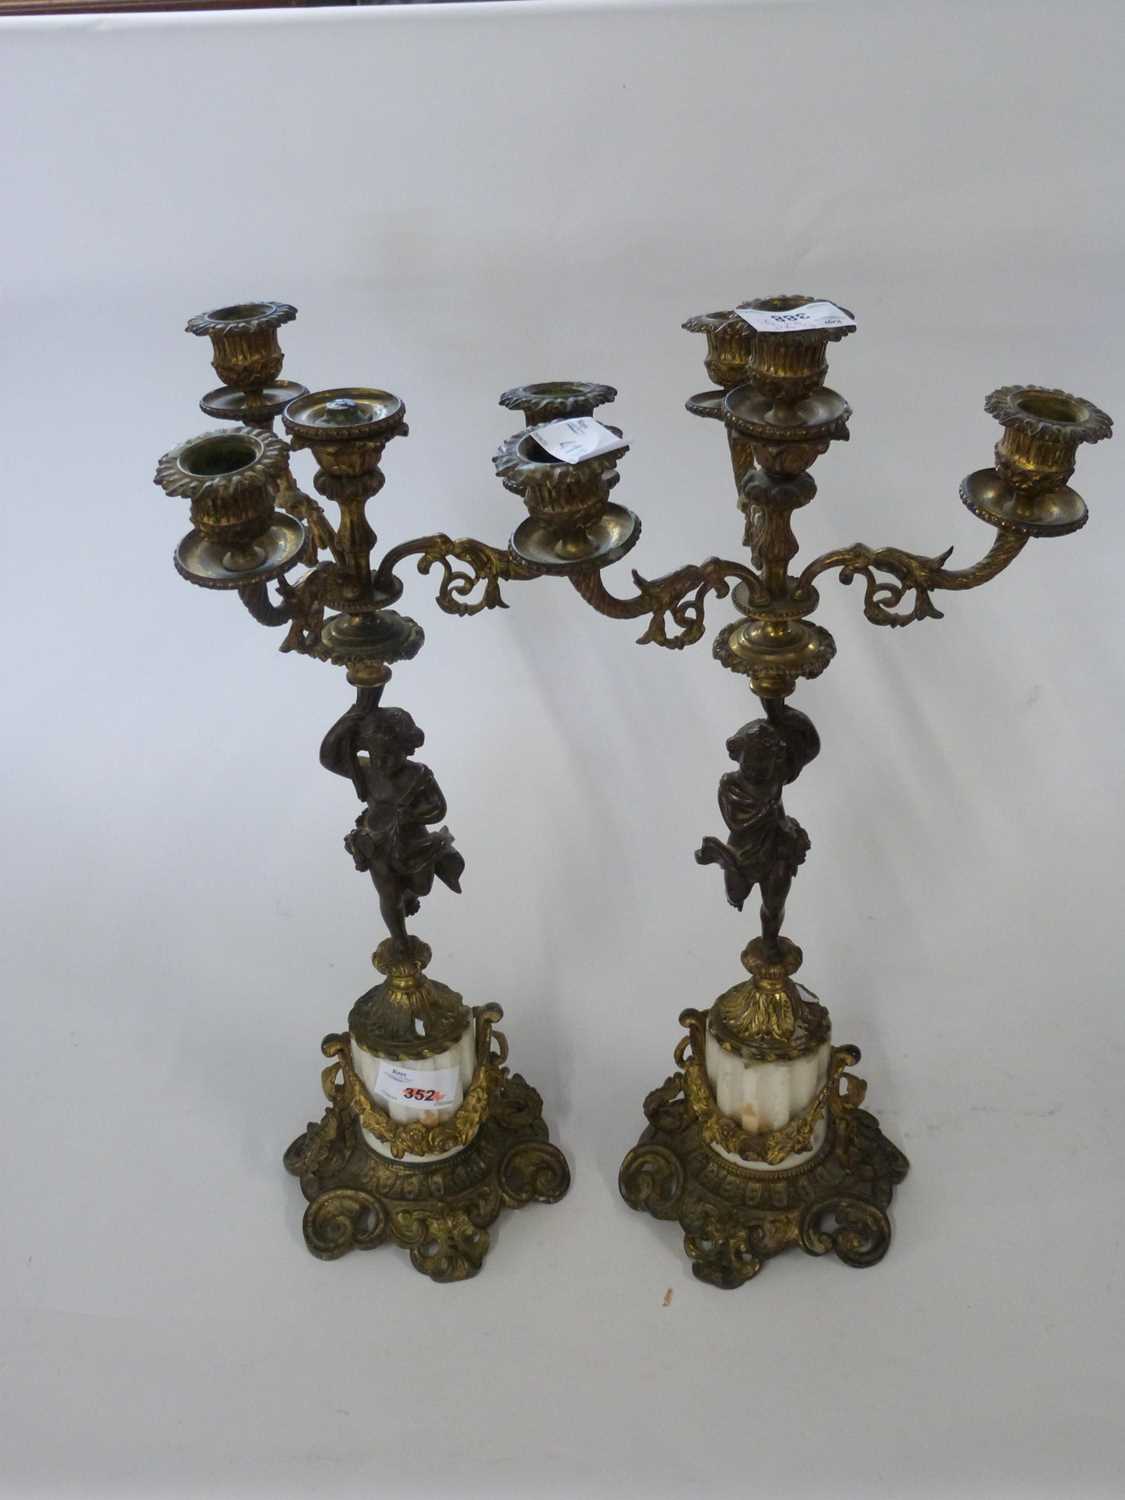 Pair of candelabra in French Empire style the four branch candelabra supported by a bronzed cherub